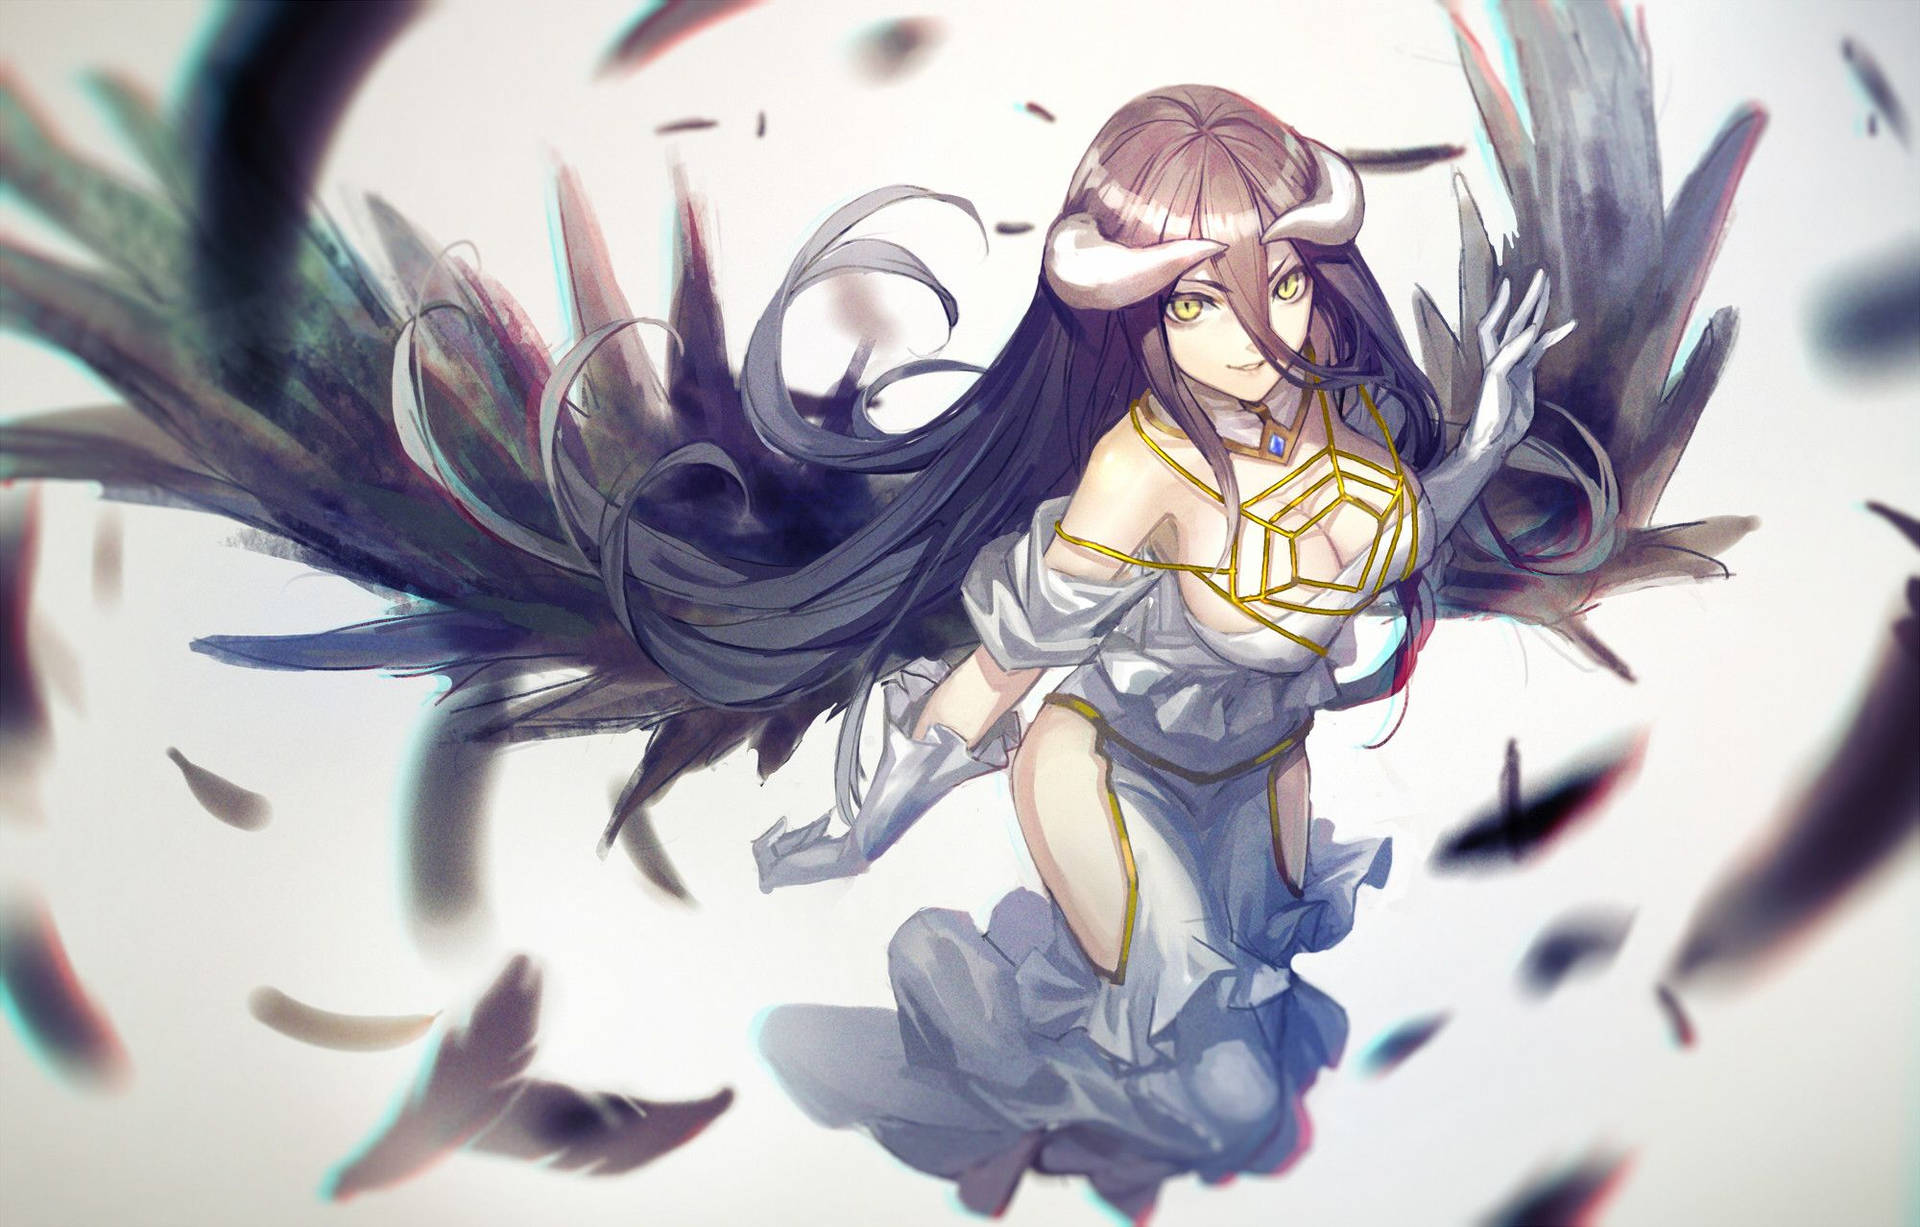 Albedo, the powerful leader of the Great Tomb of Nazarick Wallpaper